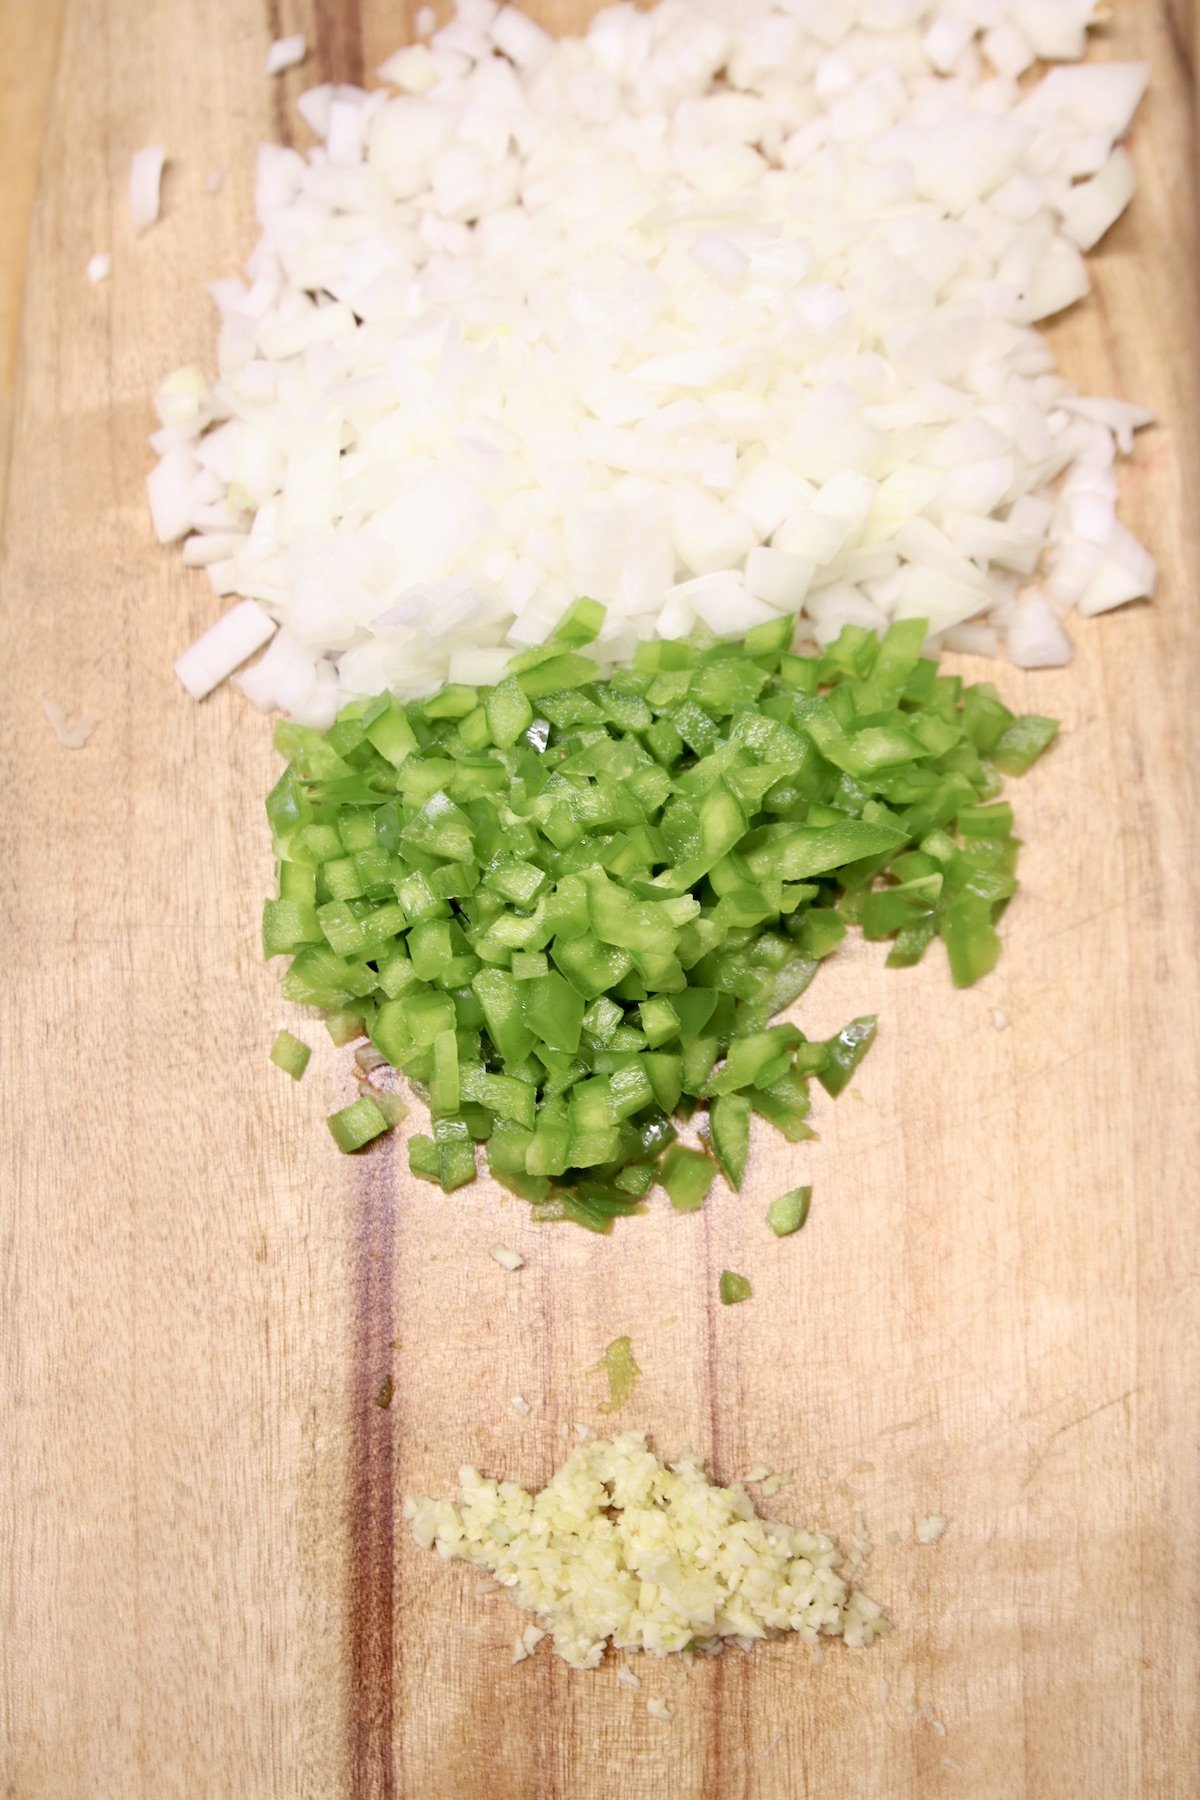 diced onions, bell peppers and minced garlic on a cutting board